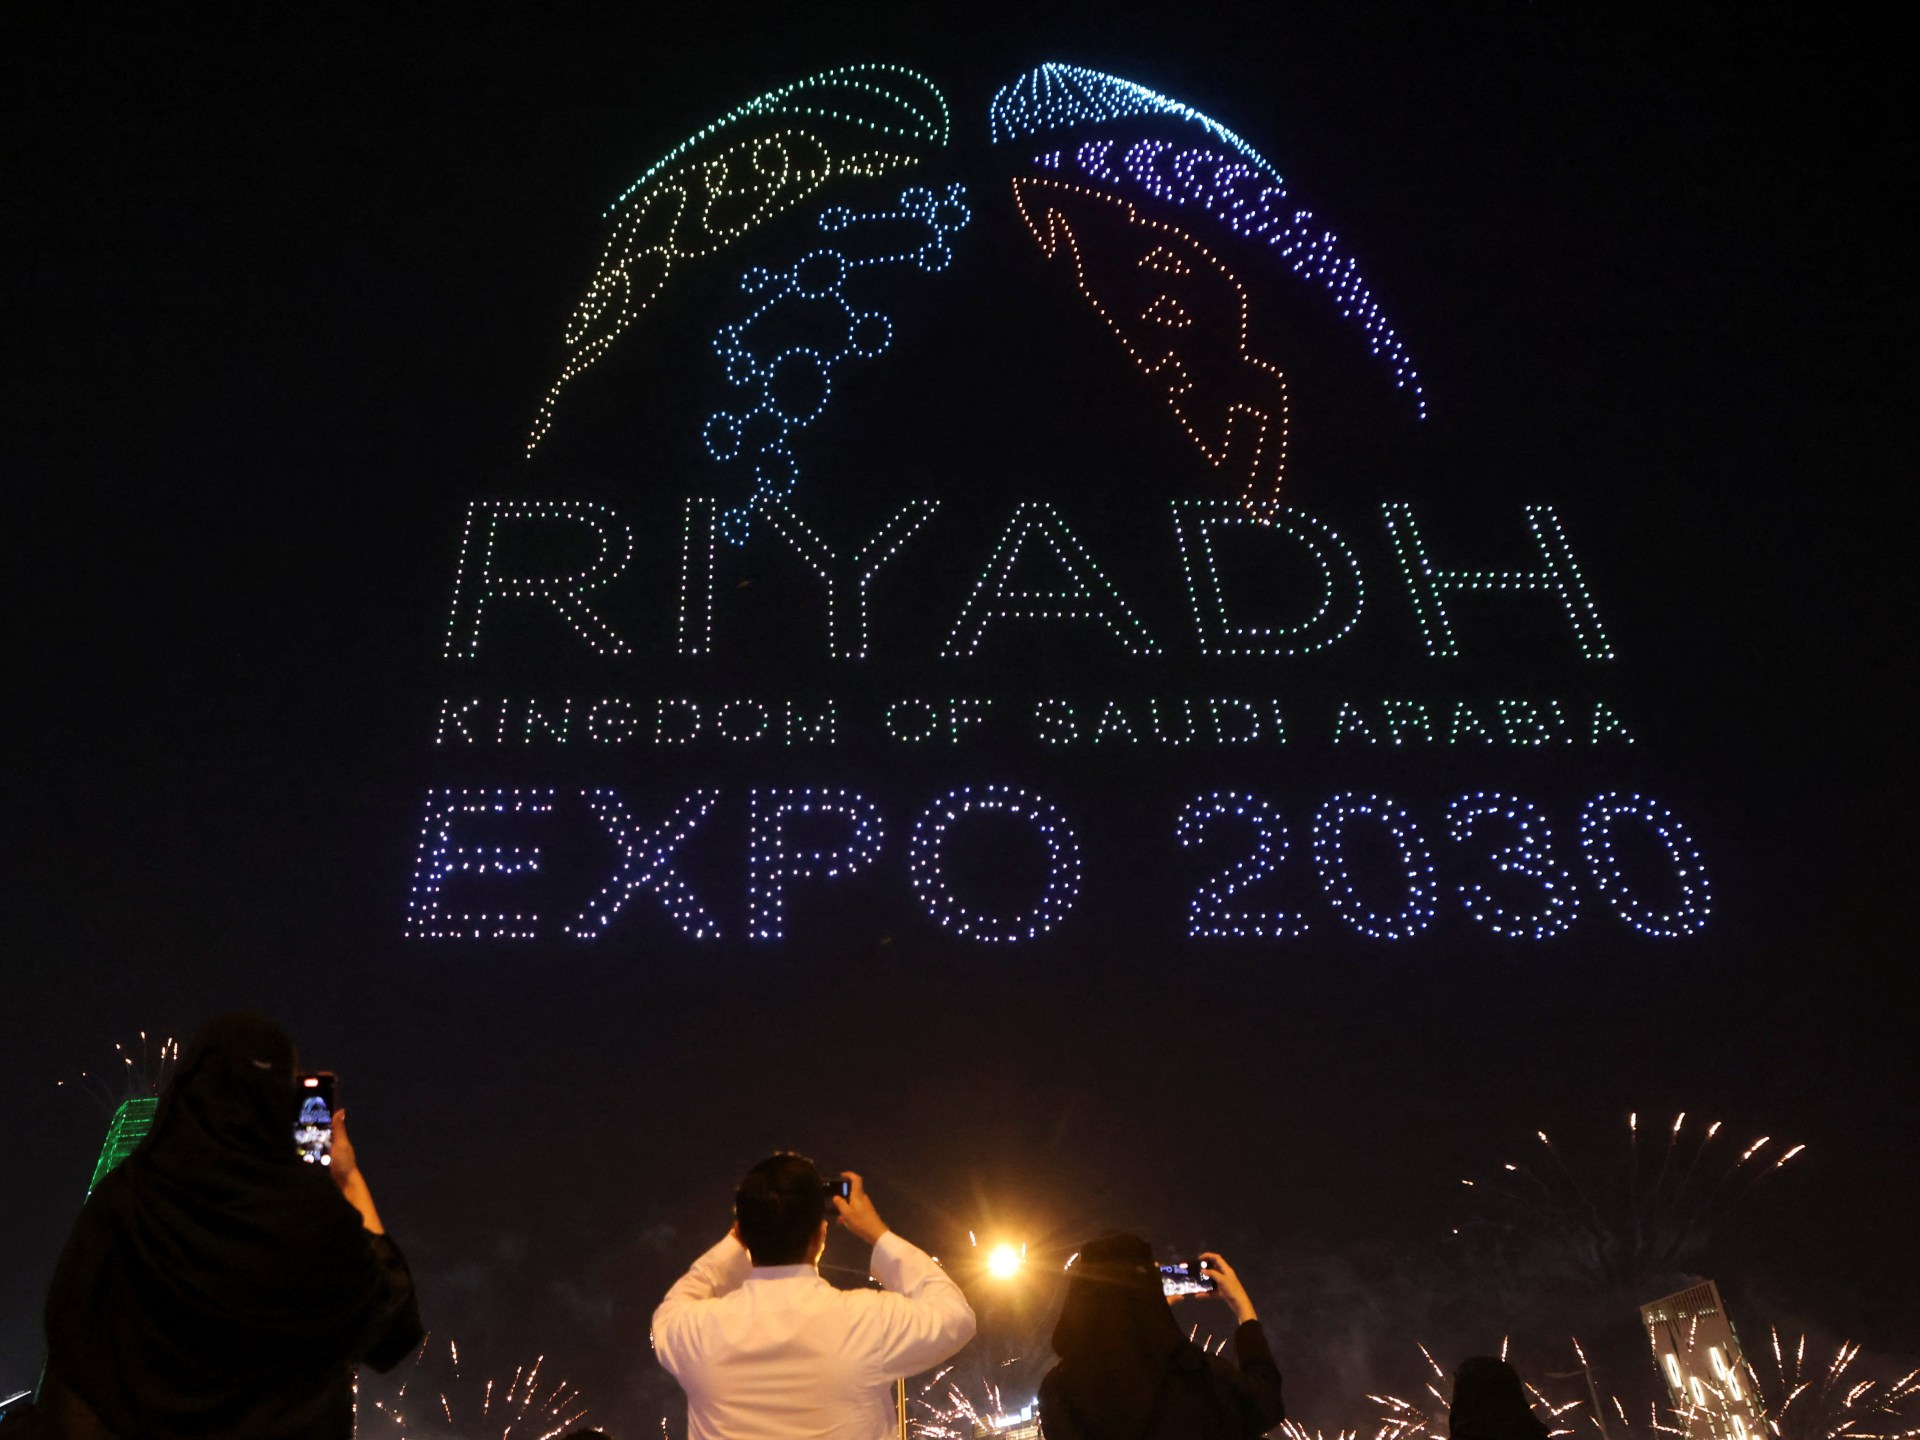 Saudi Arabia selected to host World Expo in 2030 | Entertainment News #Saudi #Arabia #selected #host #World #Expo #Entertainment #News